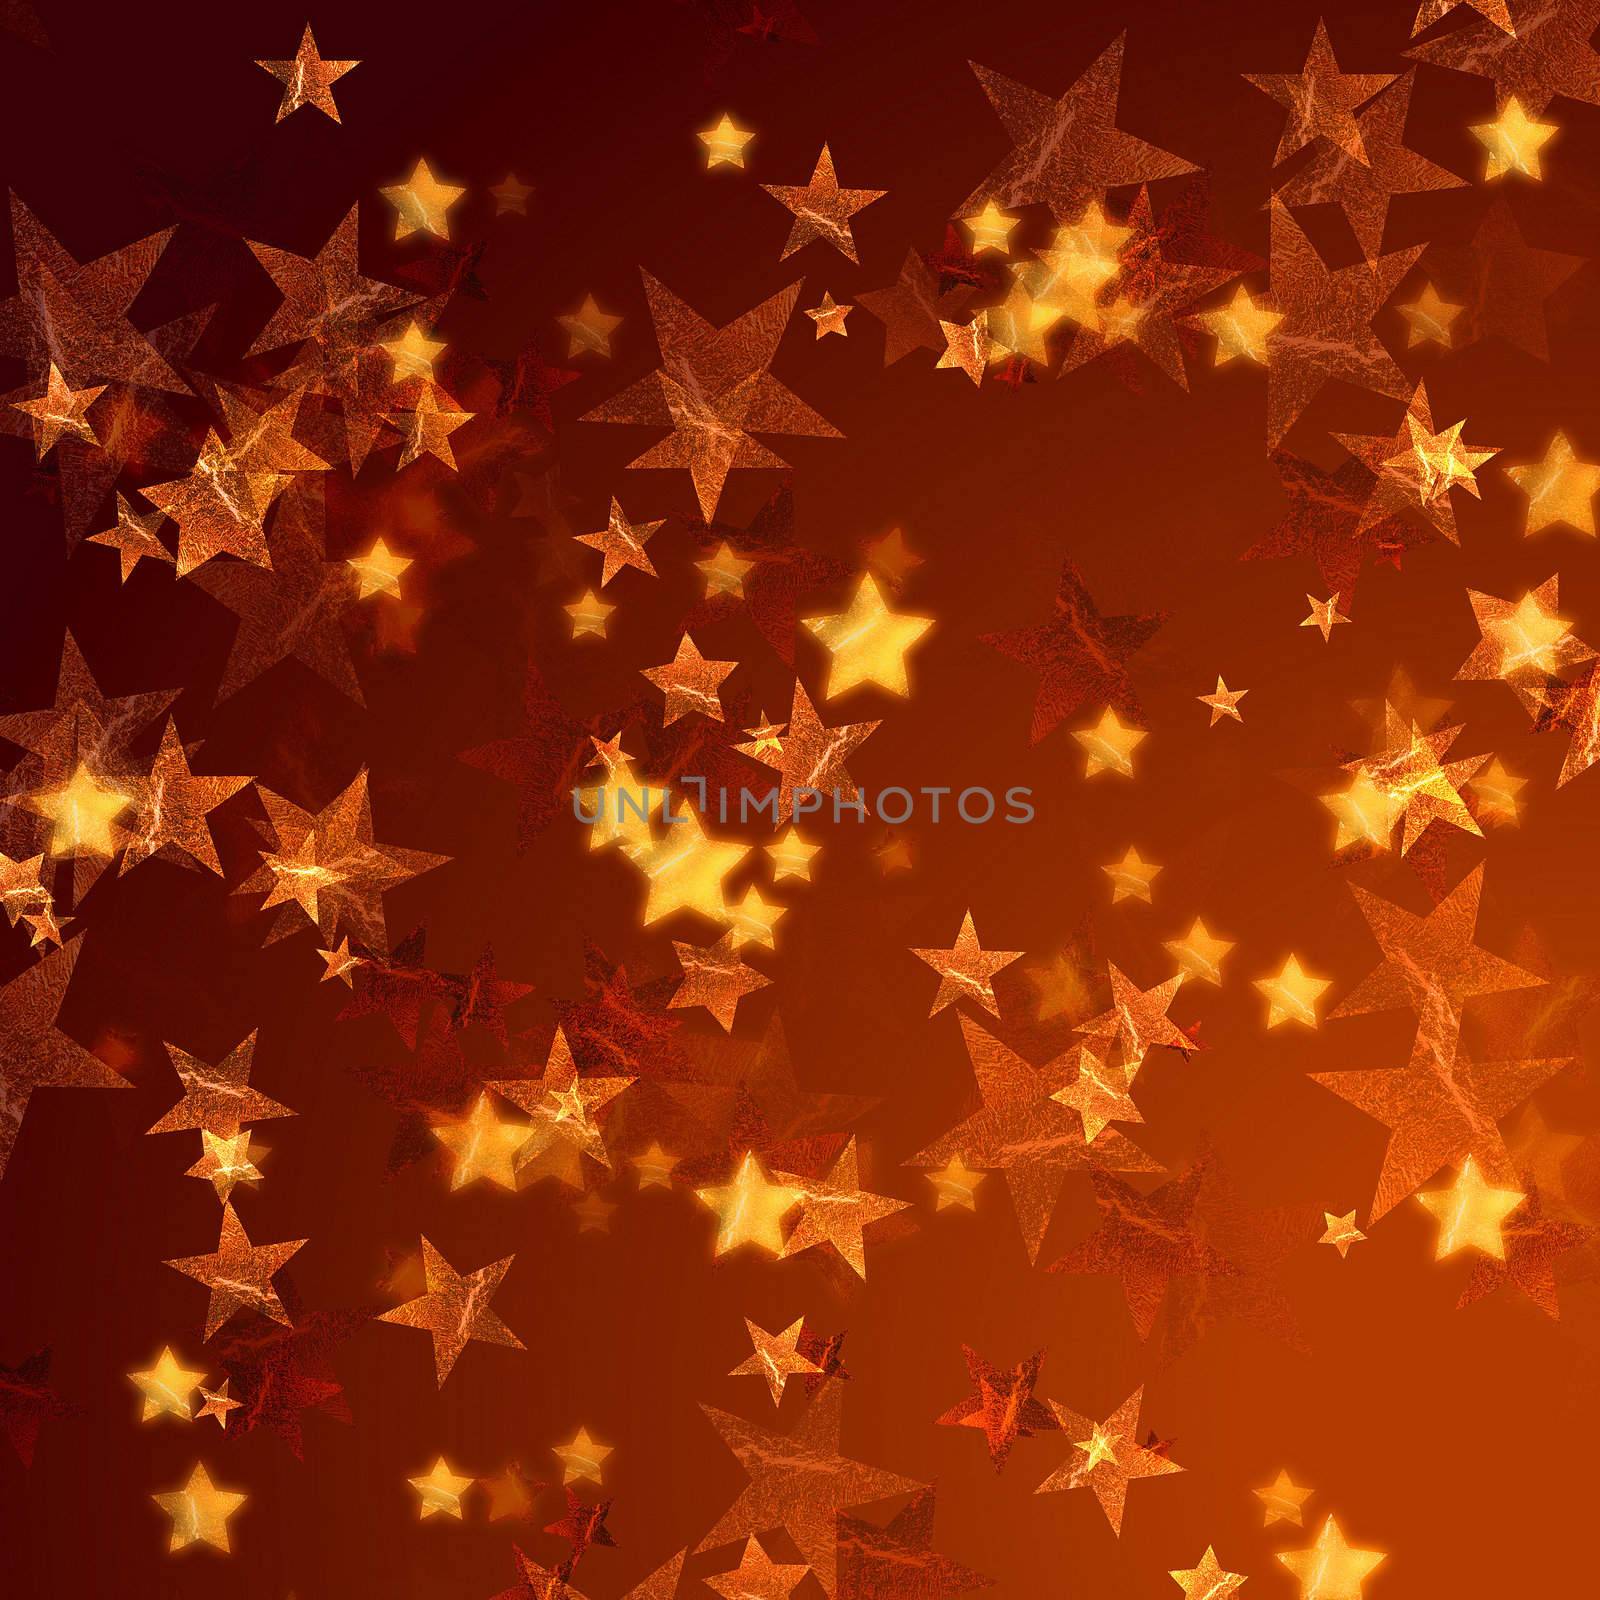 golden stars over gold background with feather corner